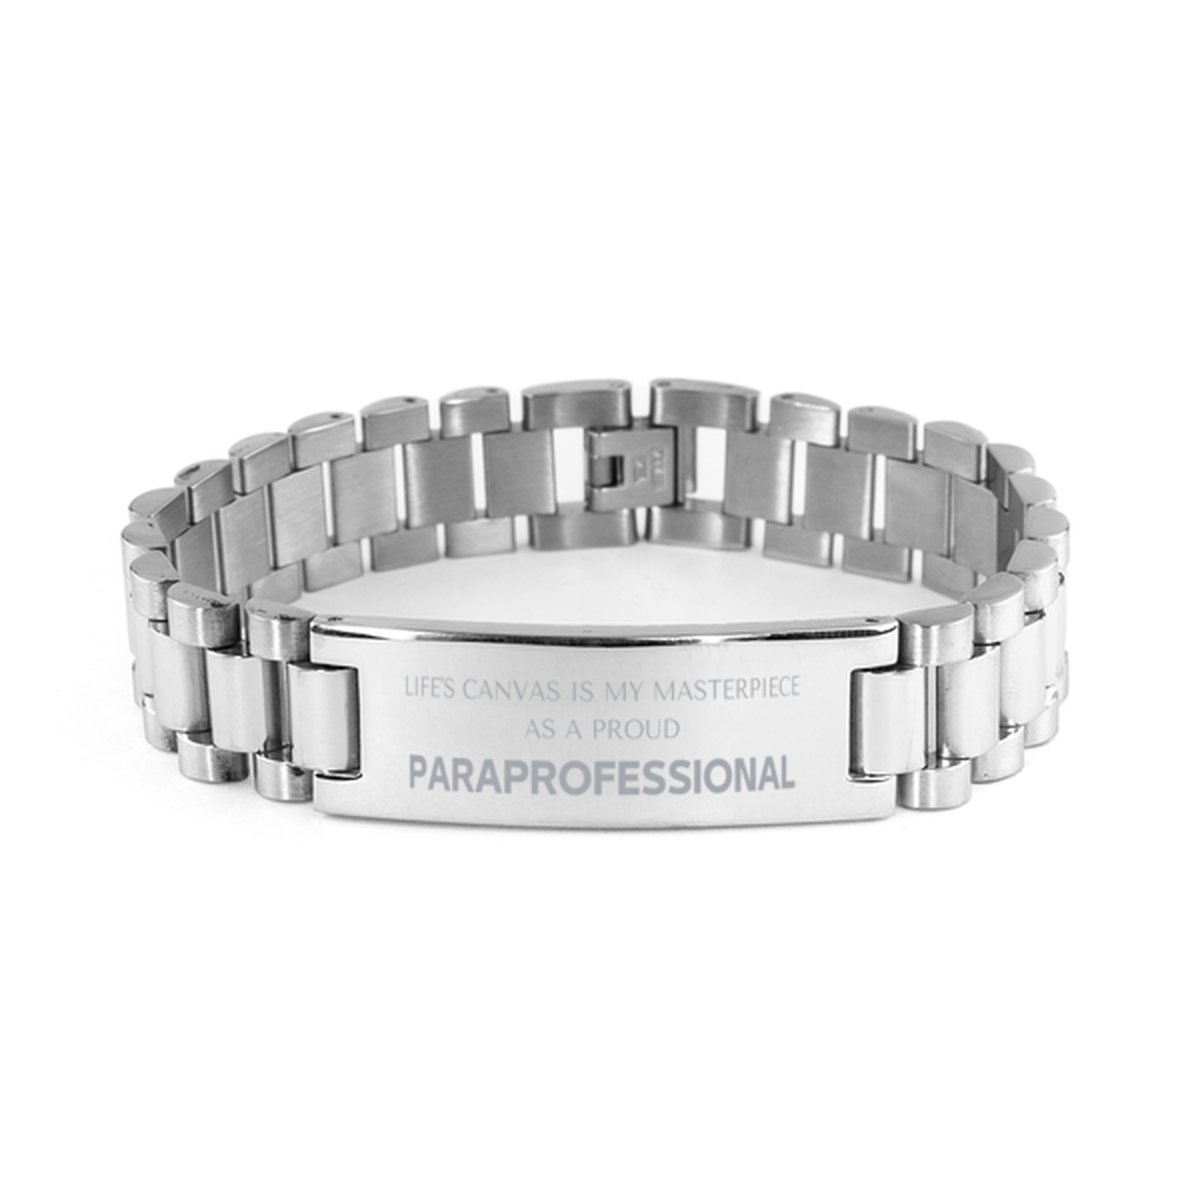 Proud Paraprofessional Gifts, Life's canvas is my masterpiece, Epic Birthday Christmas Unique Ladder Stainless Steel Bracelet For Paraprofessional, Coworkers, Men, Women, Friends